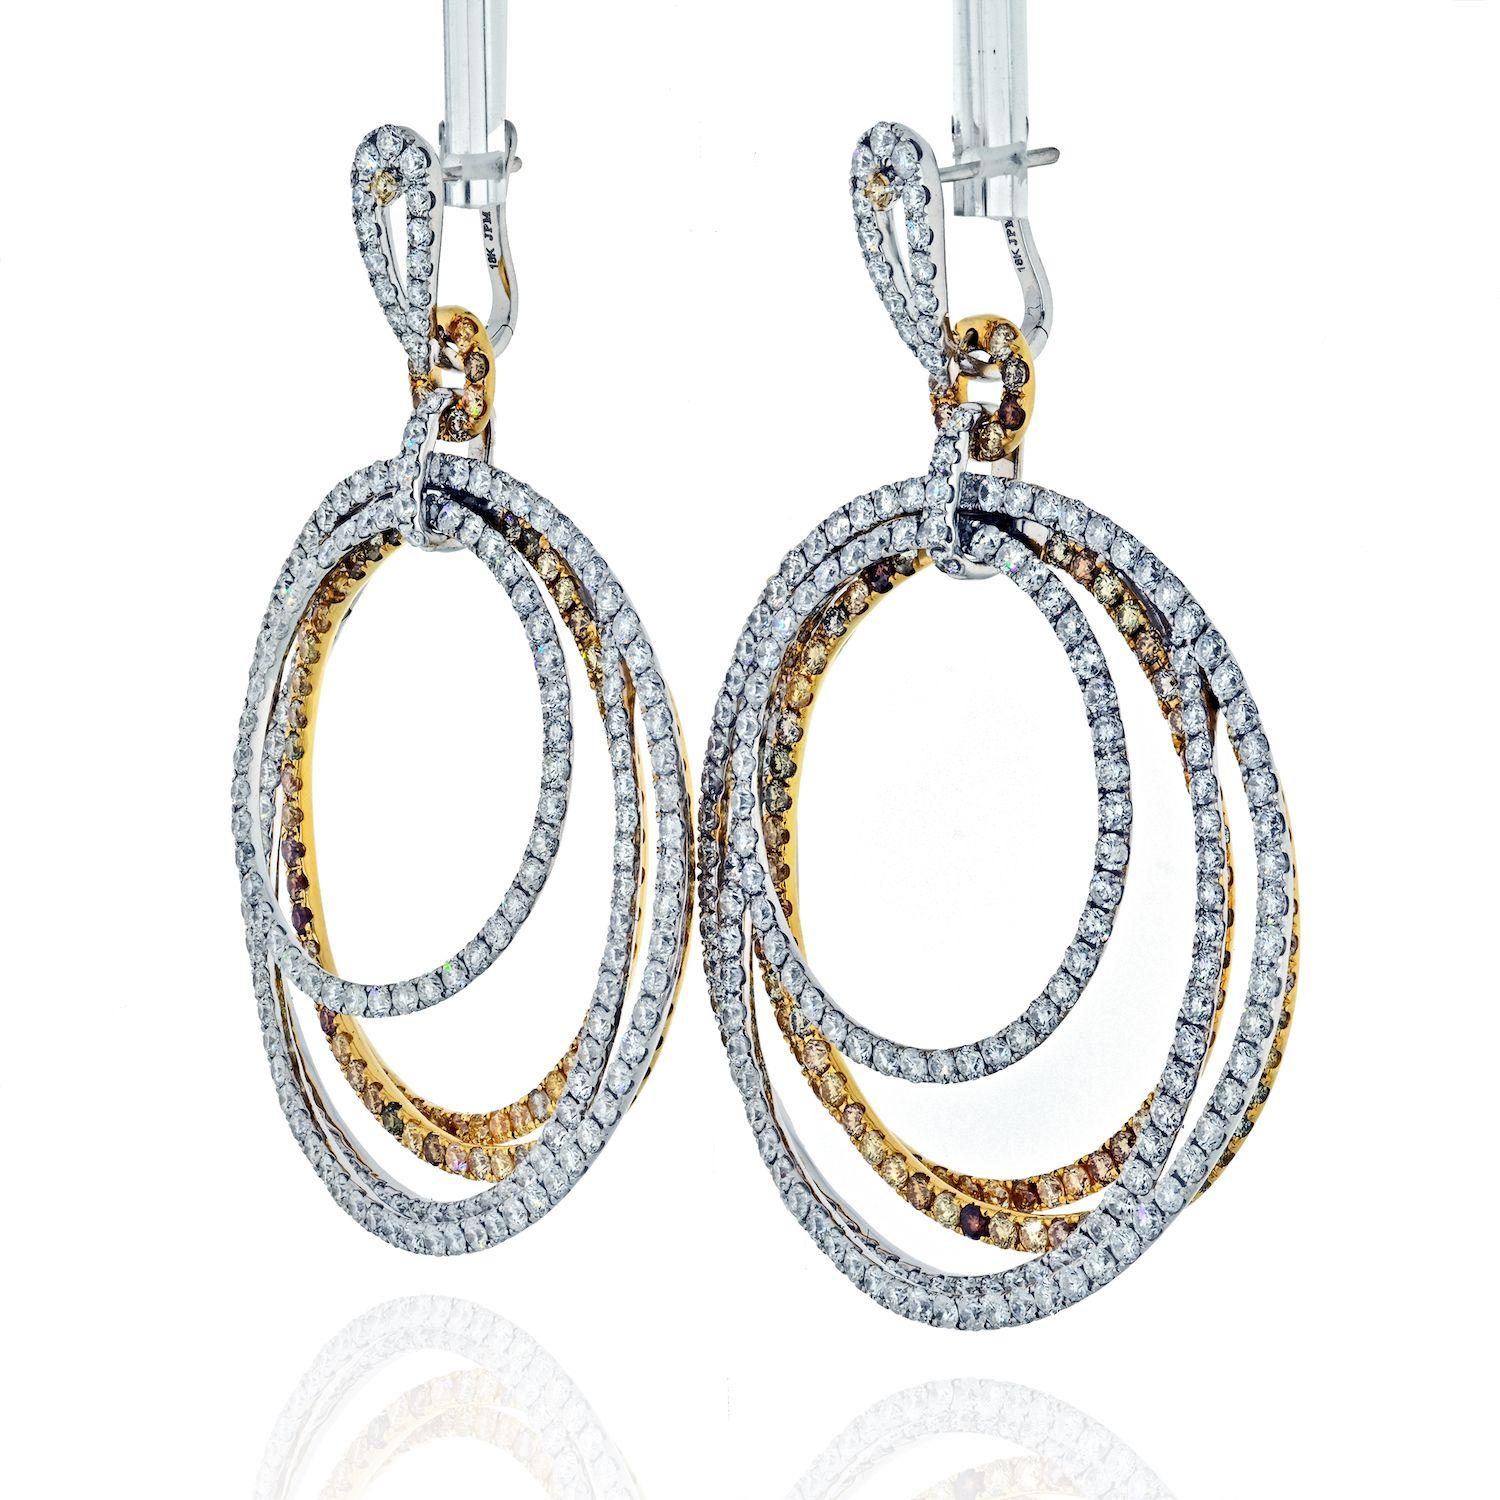 Brilliant pave round cut diamond earrings crafted in 18K two tone gold set with over 20 carats of diamonds. About 2 inches from top to bottom. 
For pierced ears. 2.25 inches long. About 1.25 inches wide.